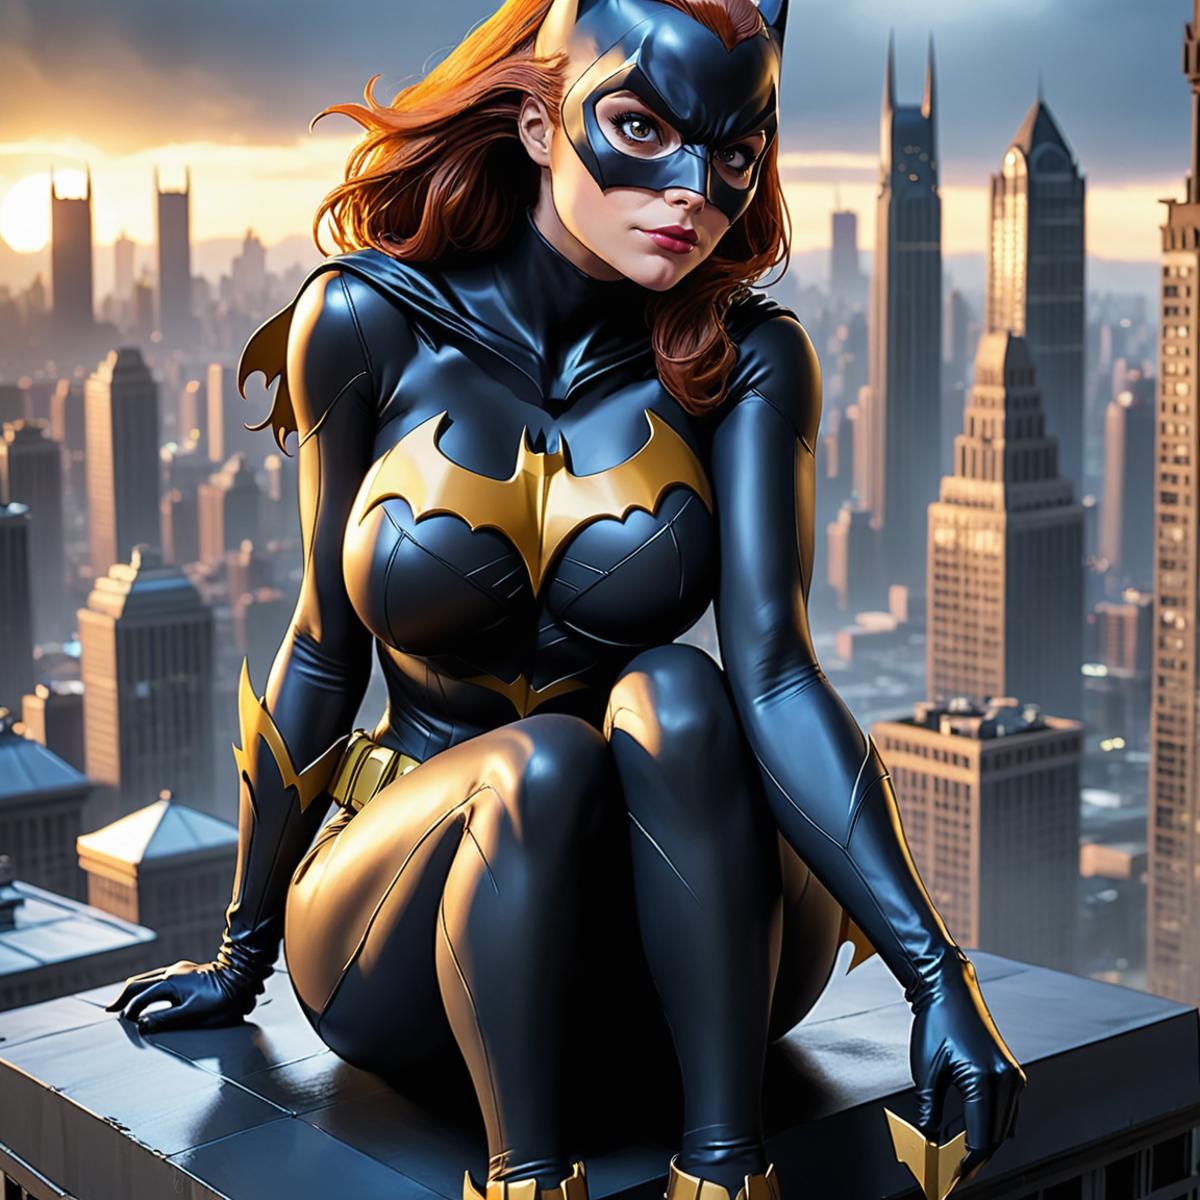 A Batwoman Poster with a Cityscape Background